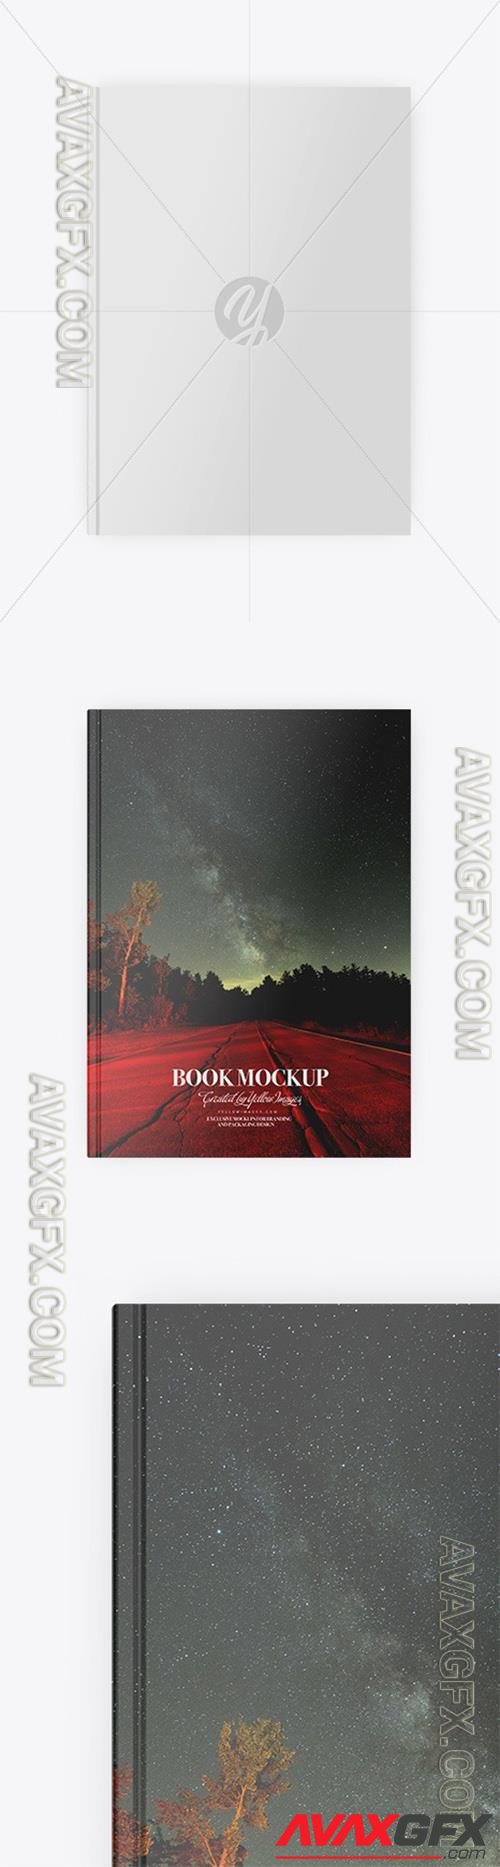 Book W/ Glossy Cover Mockup - Top View 48811 TIF